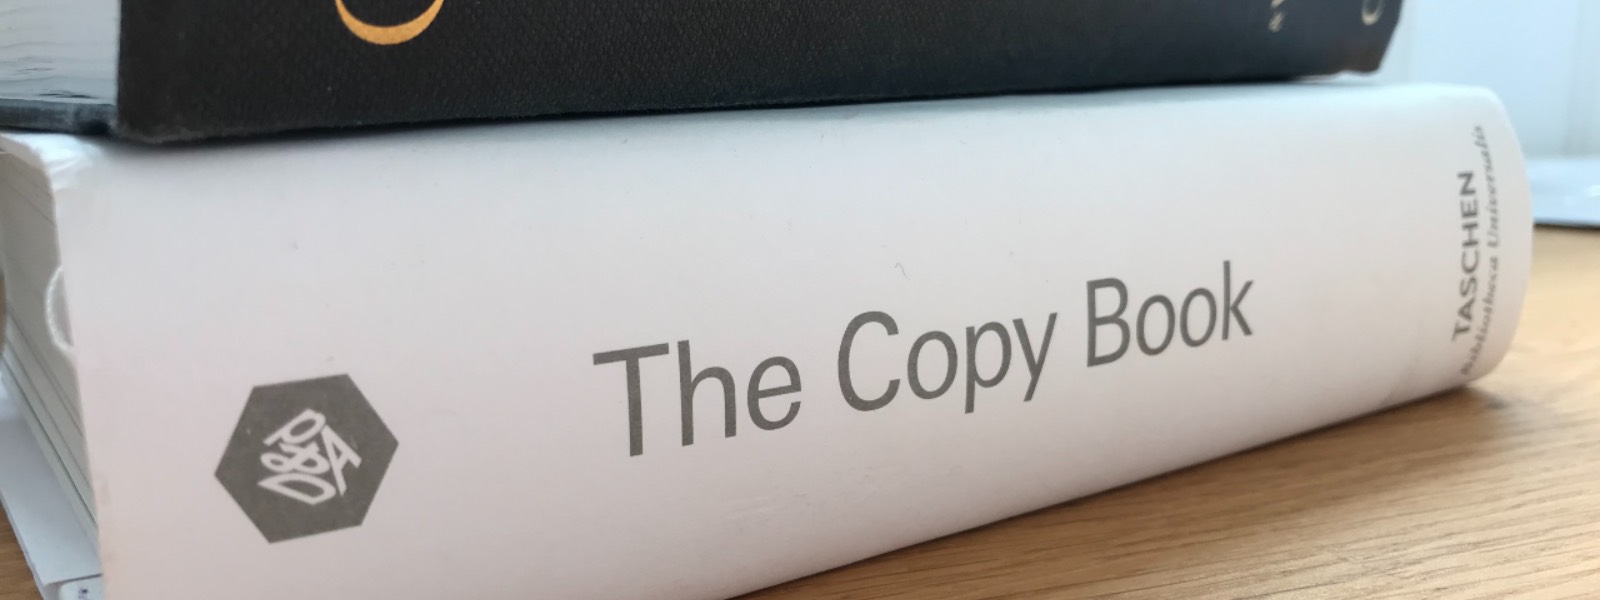 The spine of 'The Copy Book'